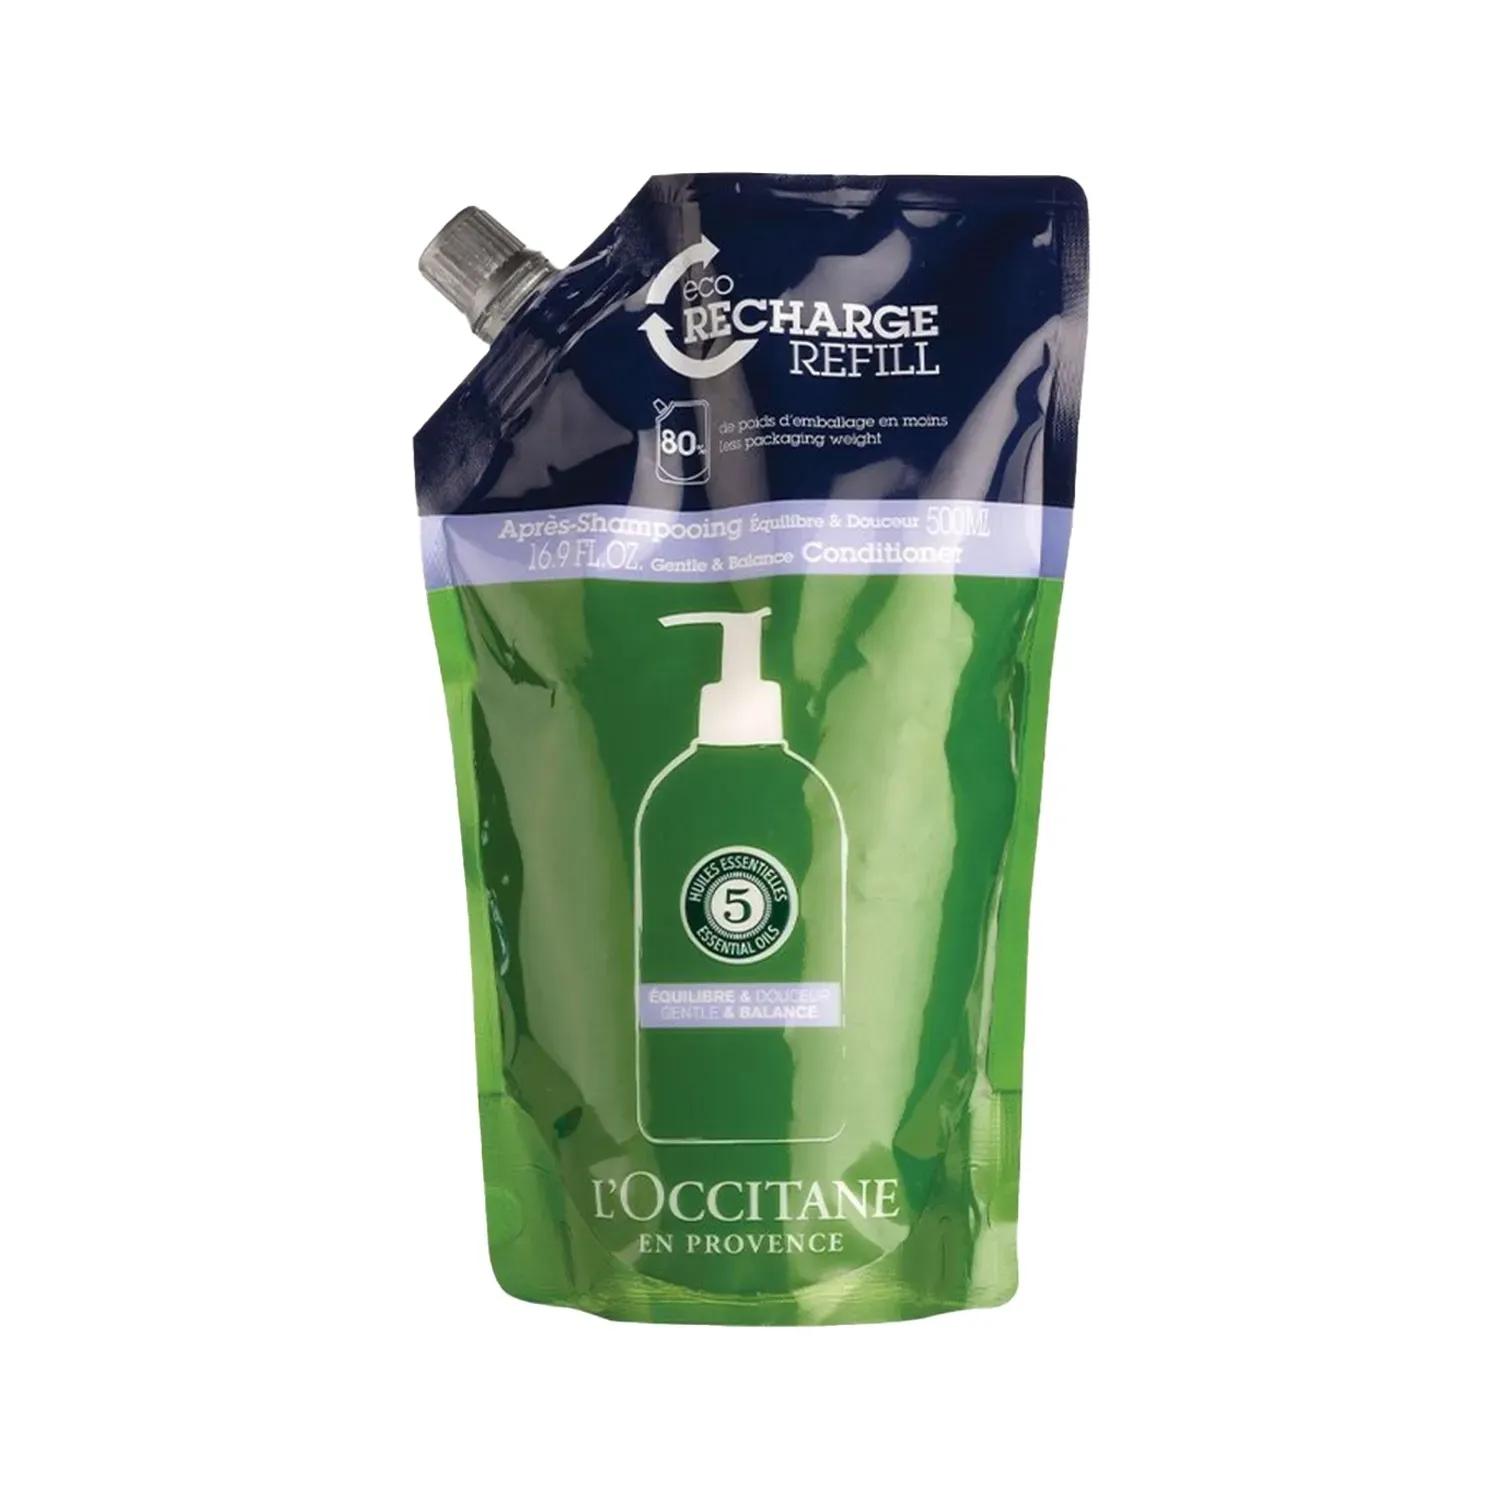 L'Occitane  EN Provence Gentle & Balance Shampooing Conditioner Eco Recharge Refill (500ml)